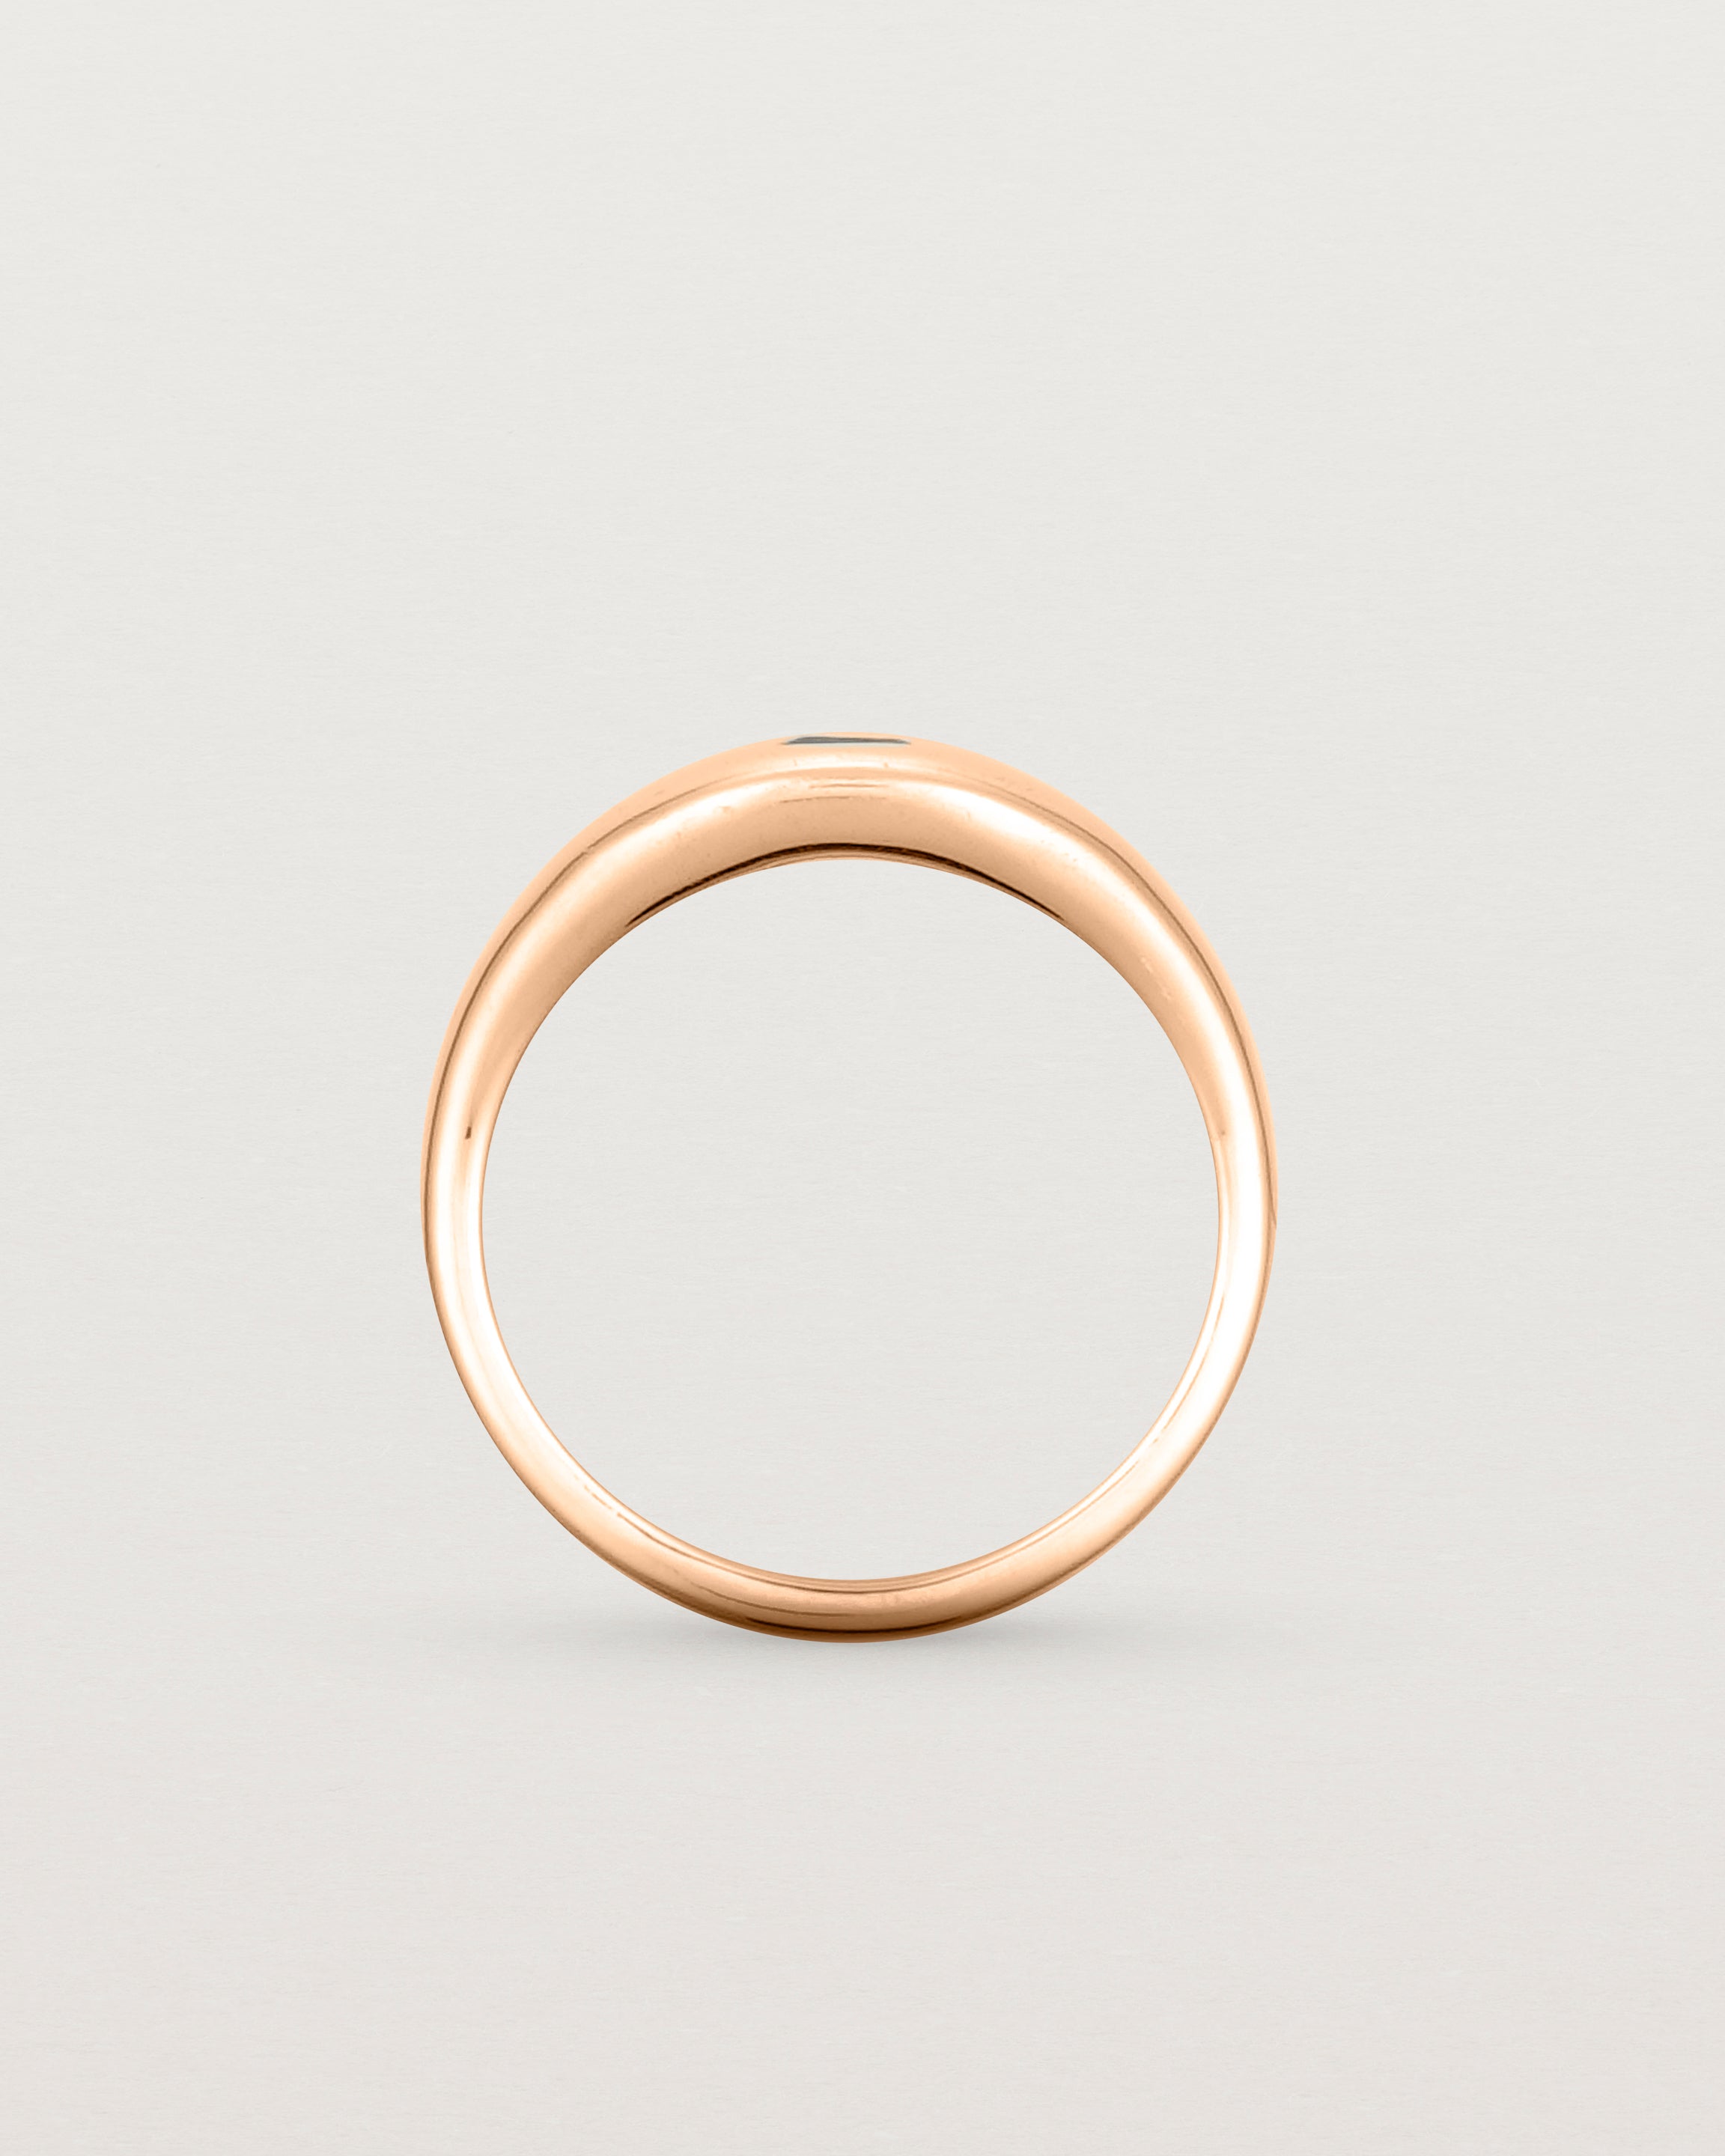 standing view of the Seule Single Ring | Diamond | Rose Gold.